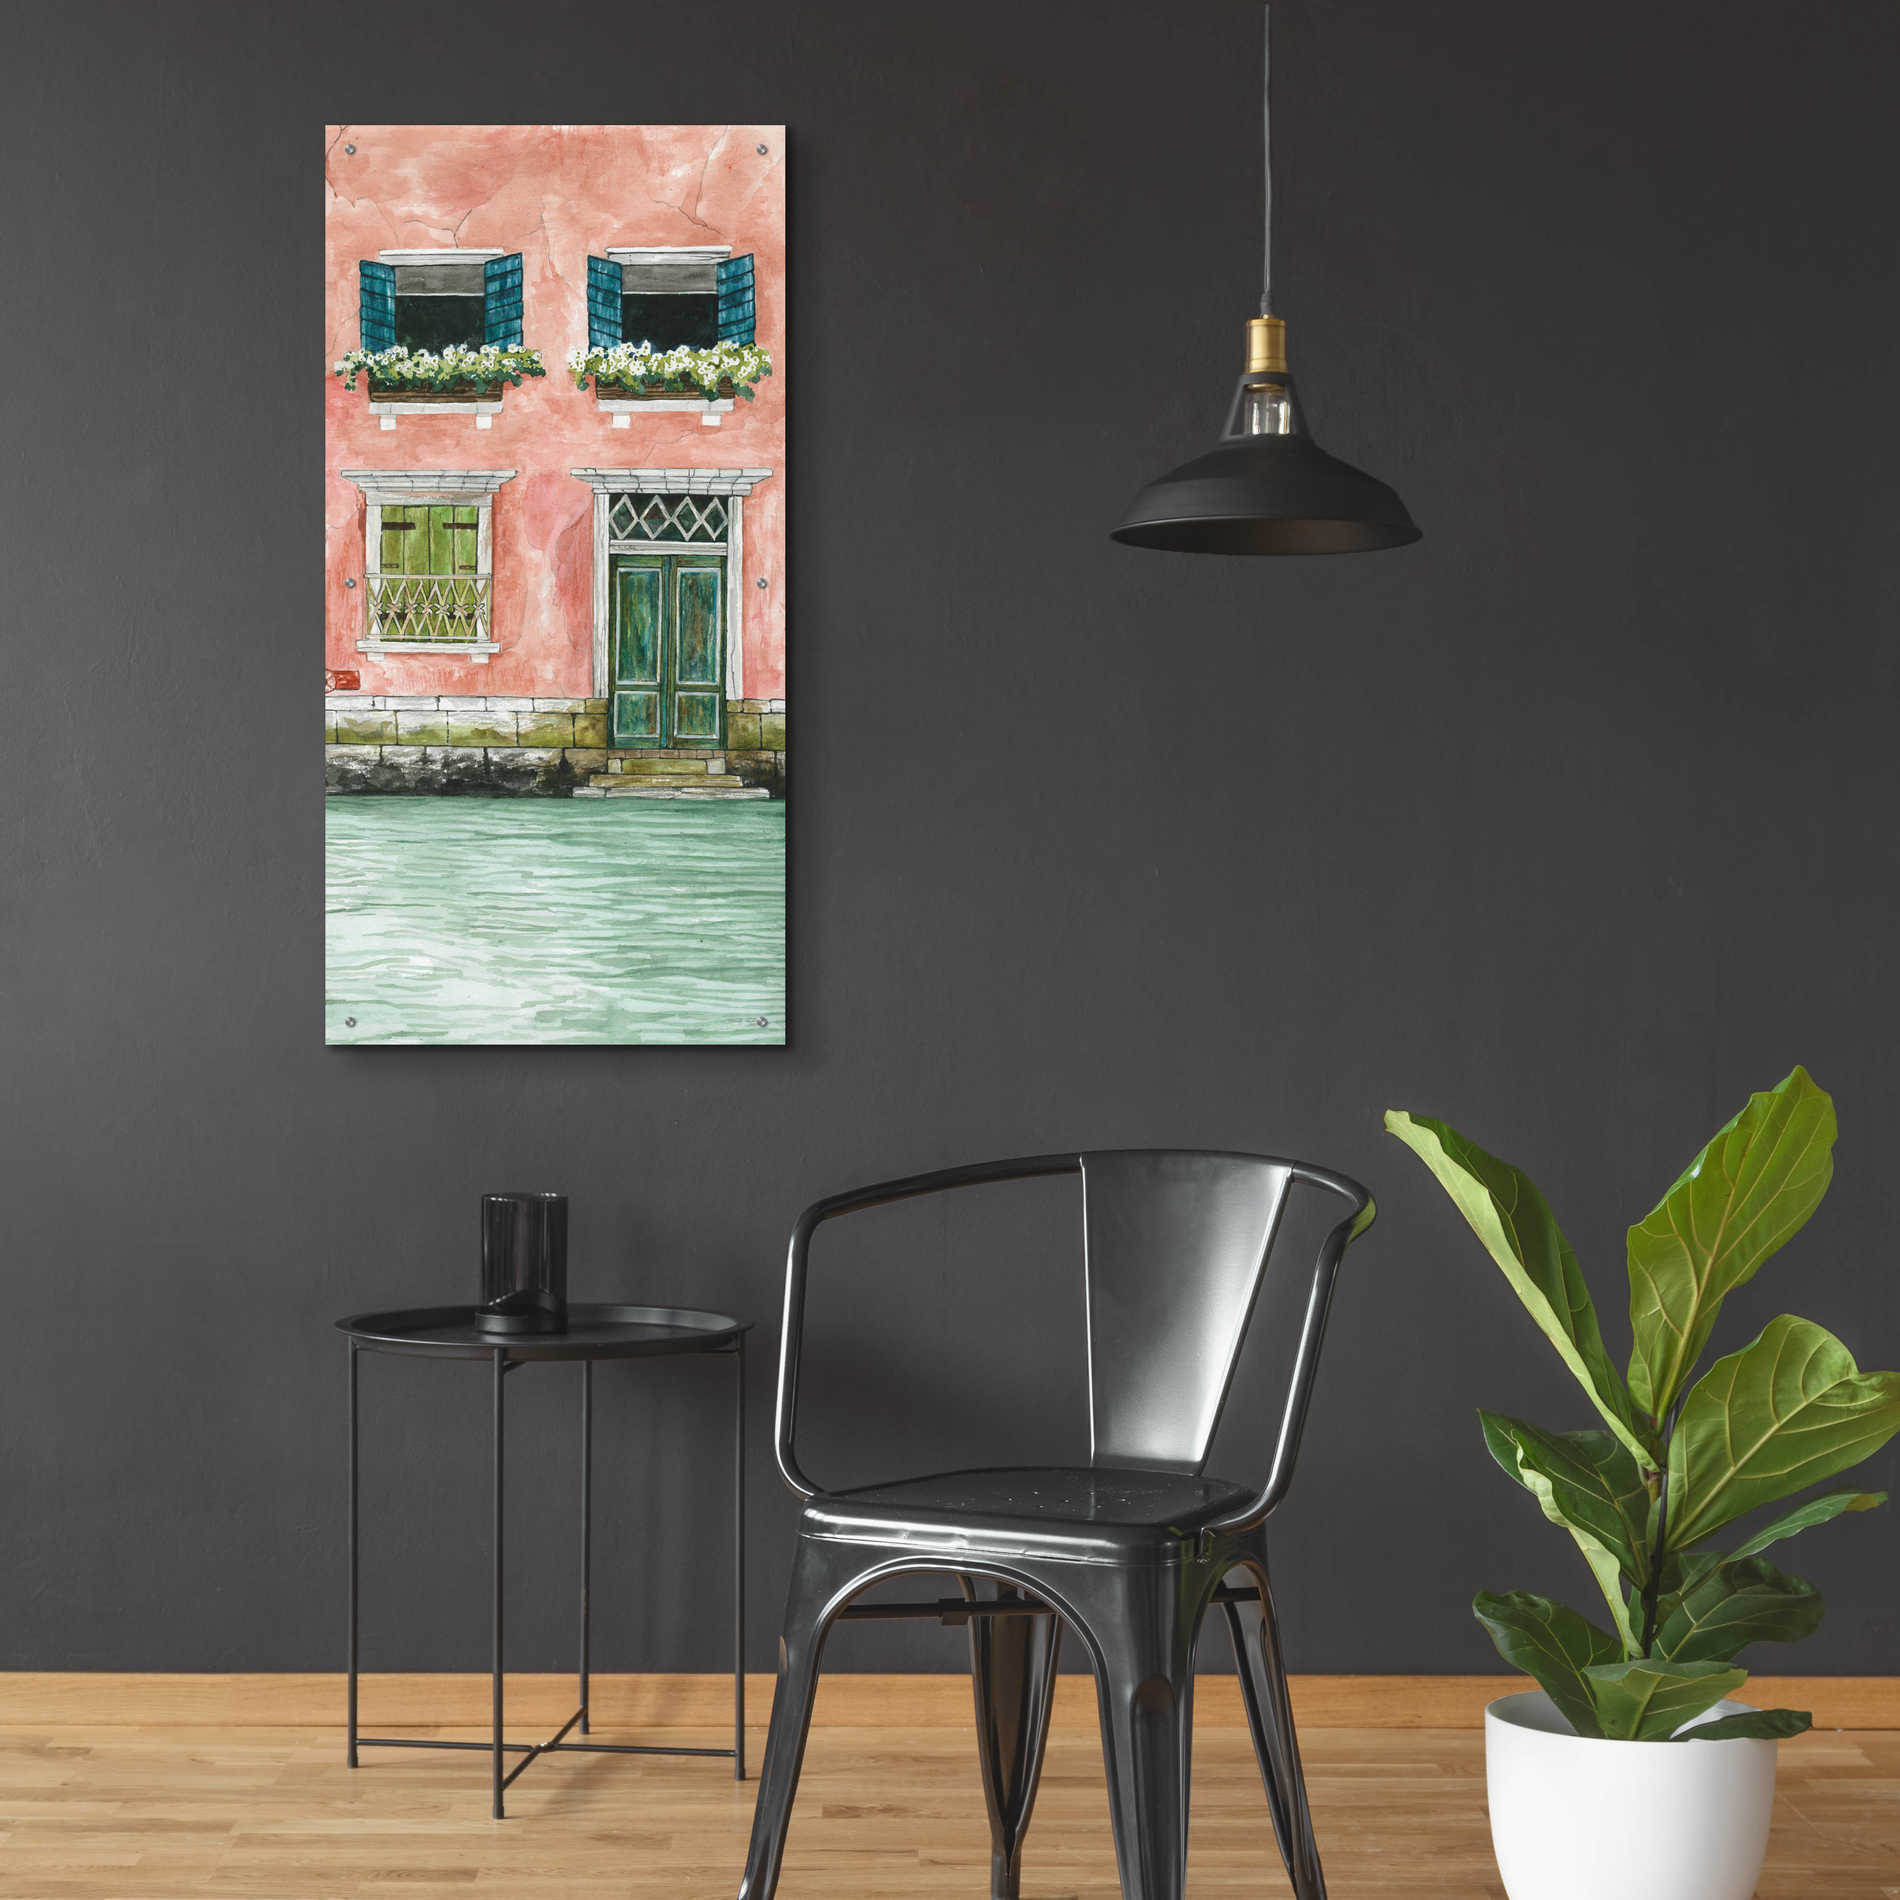 Epic Art 'Grand Canal I' by Cindy Jacobs, Acrylic Glass Wall Art,24x48